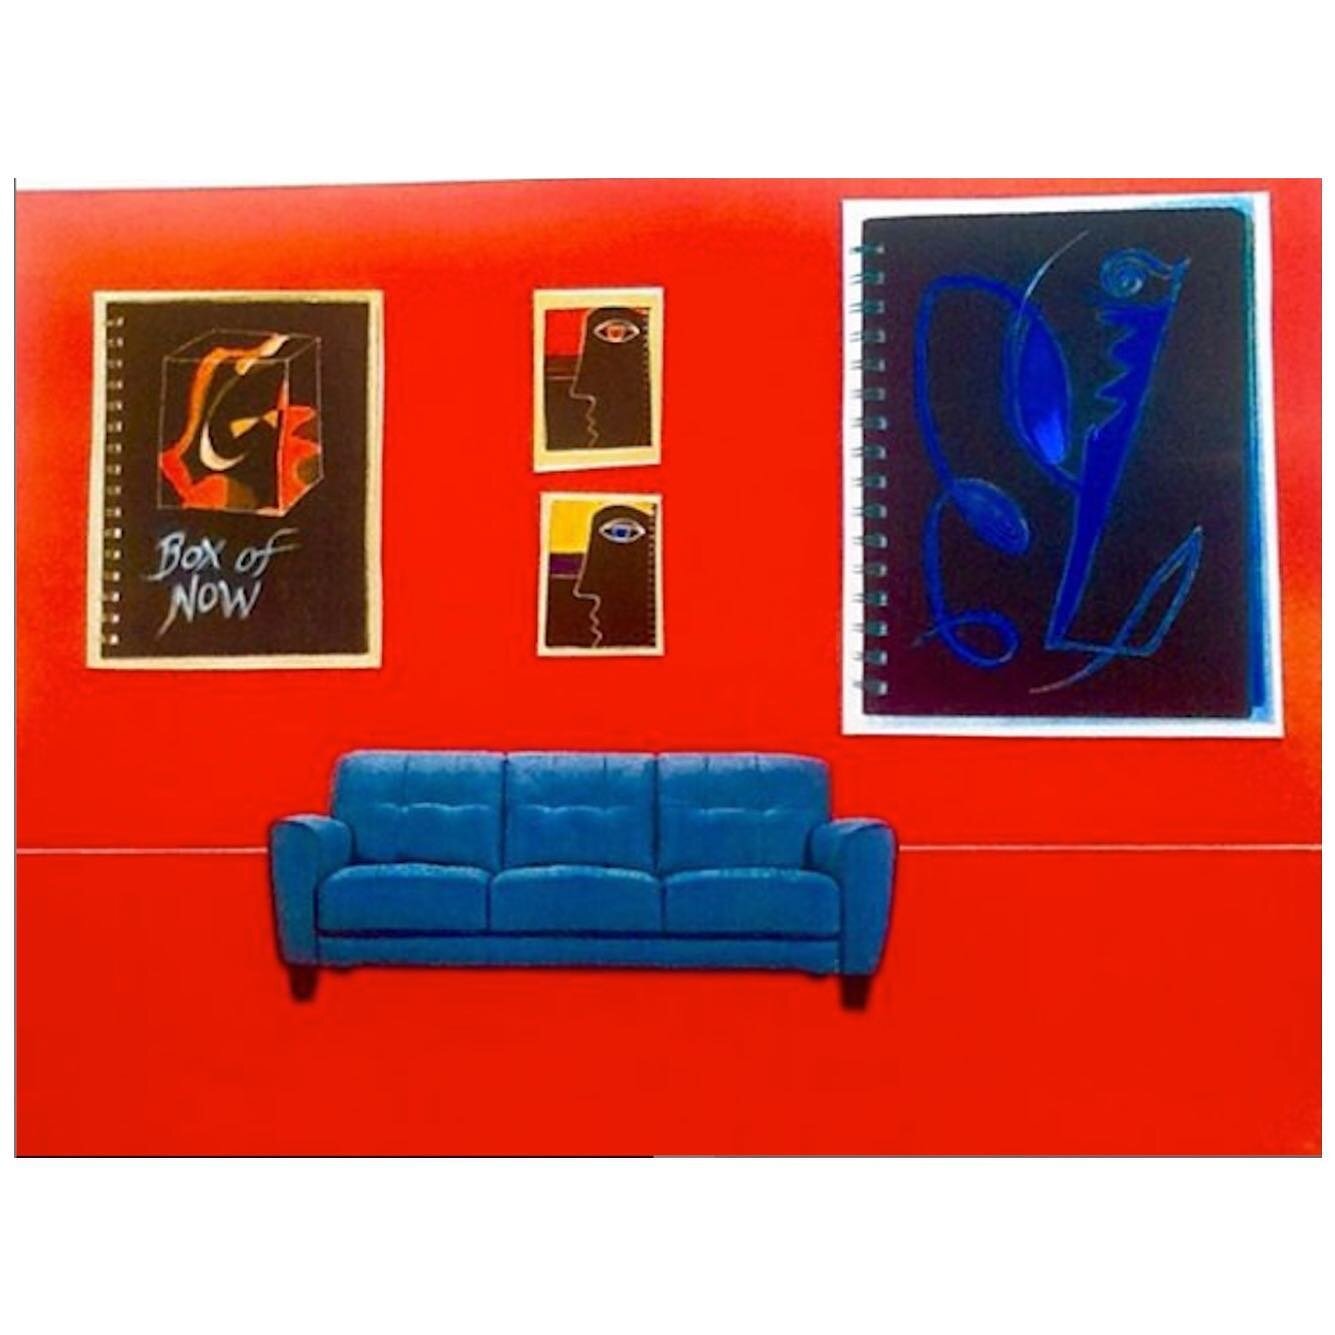 &ldquo;Art in Apartments(in what used to be Manhattan) #4&rdquo; 10.5.19 &ndash; Jefre Harwoods @jhmixtapes #art #arte #kunst #艺术 #&tau;έ&chi;&nu;&eta; #アート #contemporaryart #nyc #nycapartments #couch #gallery #museum #salonwall #insidethemuseum